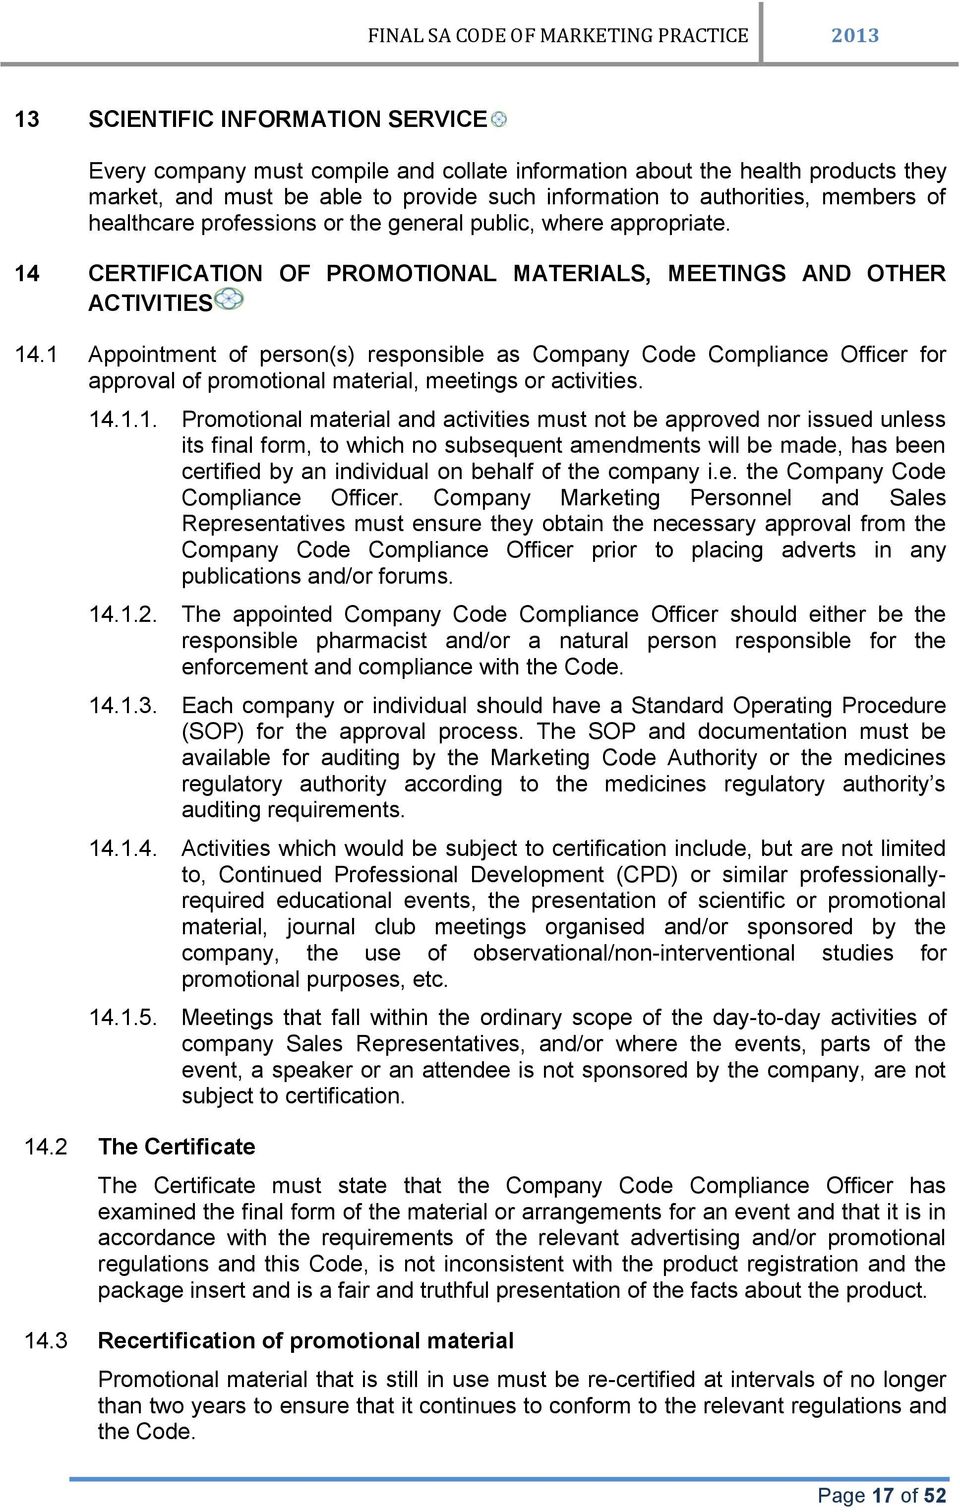 1 Appointment of person(s) responsible as Company Code Compliance Officer for approval of promotional material, meetings or activities. 14.1.1. Promotional material and activities must not be